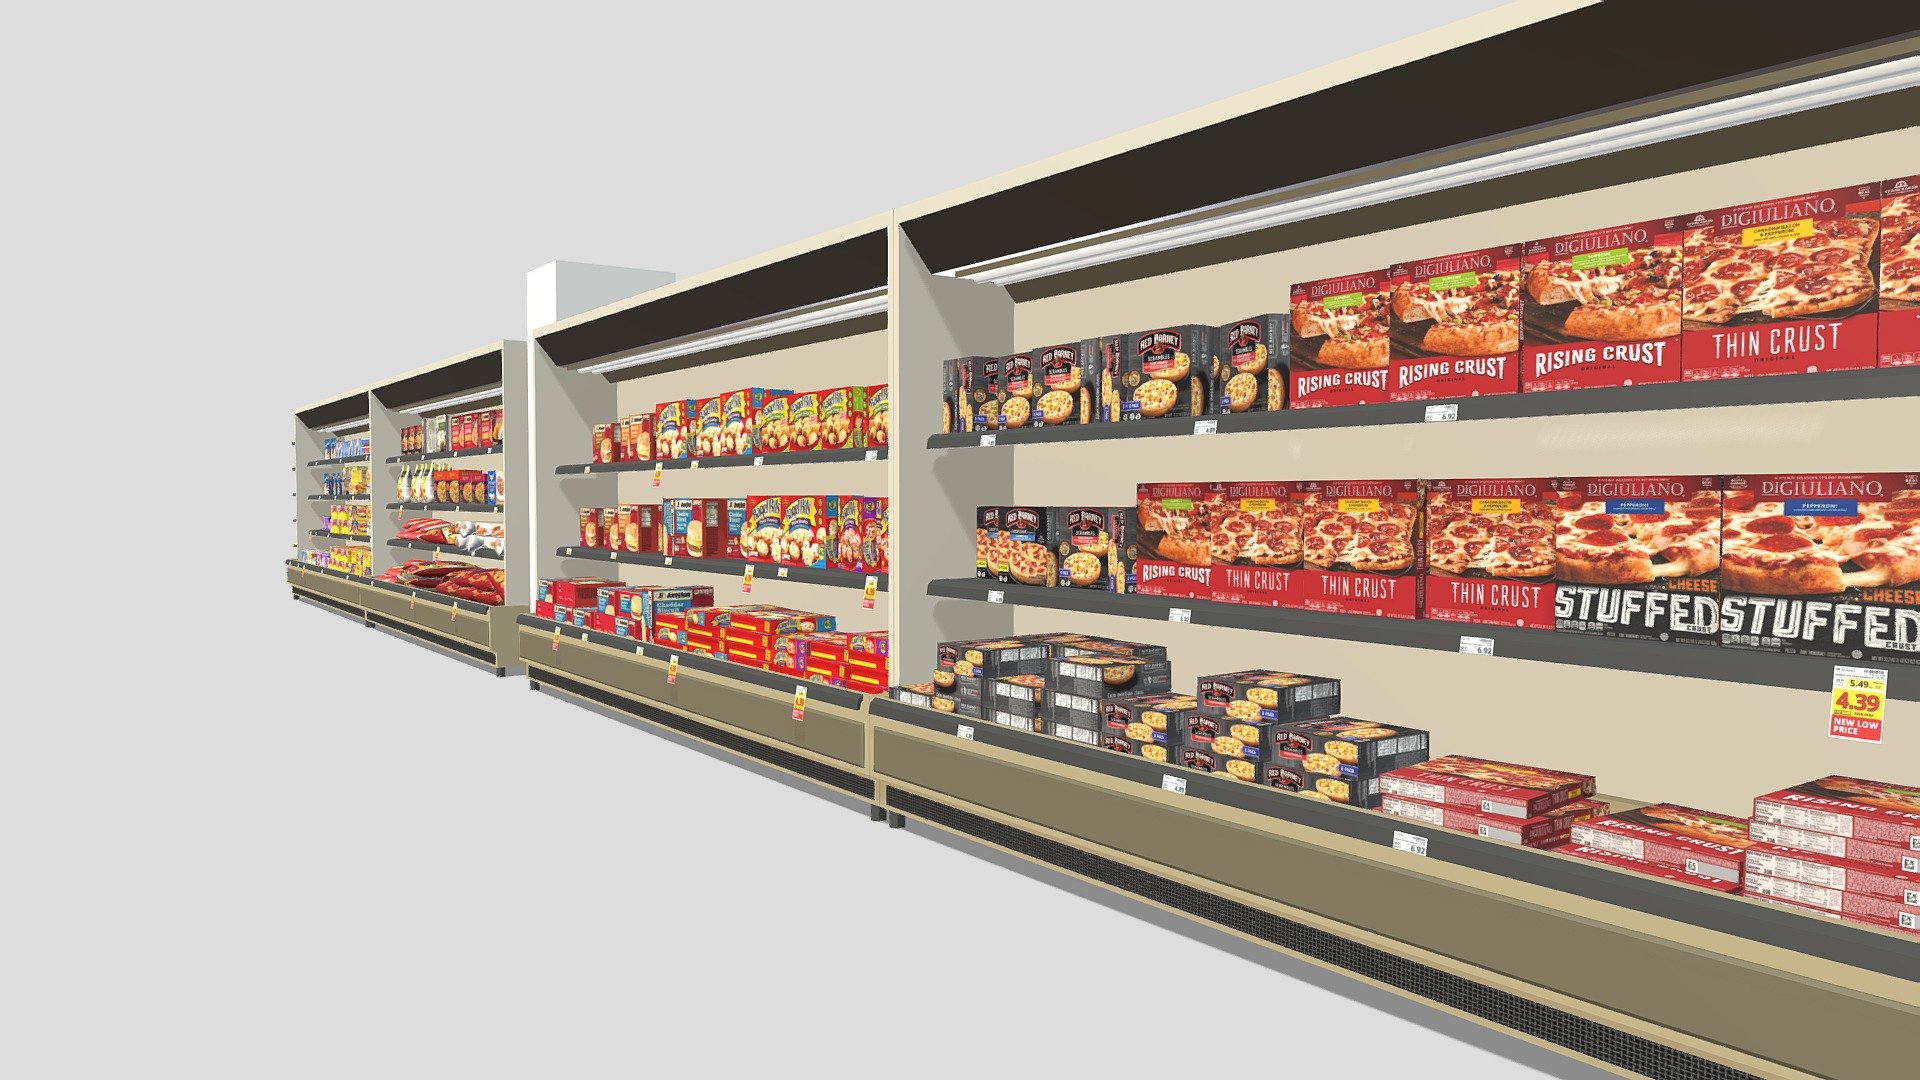 Low-poly VR / AR Models for Grocery Store

Aisle 6 - Frozen Food (Right Side)

Products: Pizza, Bagel Bites, Biscuits, Hash Browns, Tater Tots, Onion Rings, Pretzels, Taquitos, Fish Filet, Shepherd's Pie, Fruit Pastries, Waffles, English Muffins, Whip Cream, Icecream, Frozen Juices, and Pies.

More Grocery Store Products: https://skfb.ly/6STLt - Frozen Food Aisle (Right Side) - Buy Royalty Free 3D model by MW (@mw3dart) 3d model